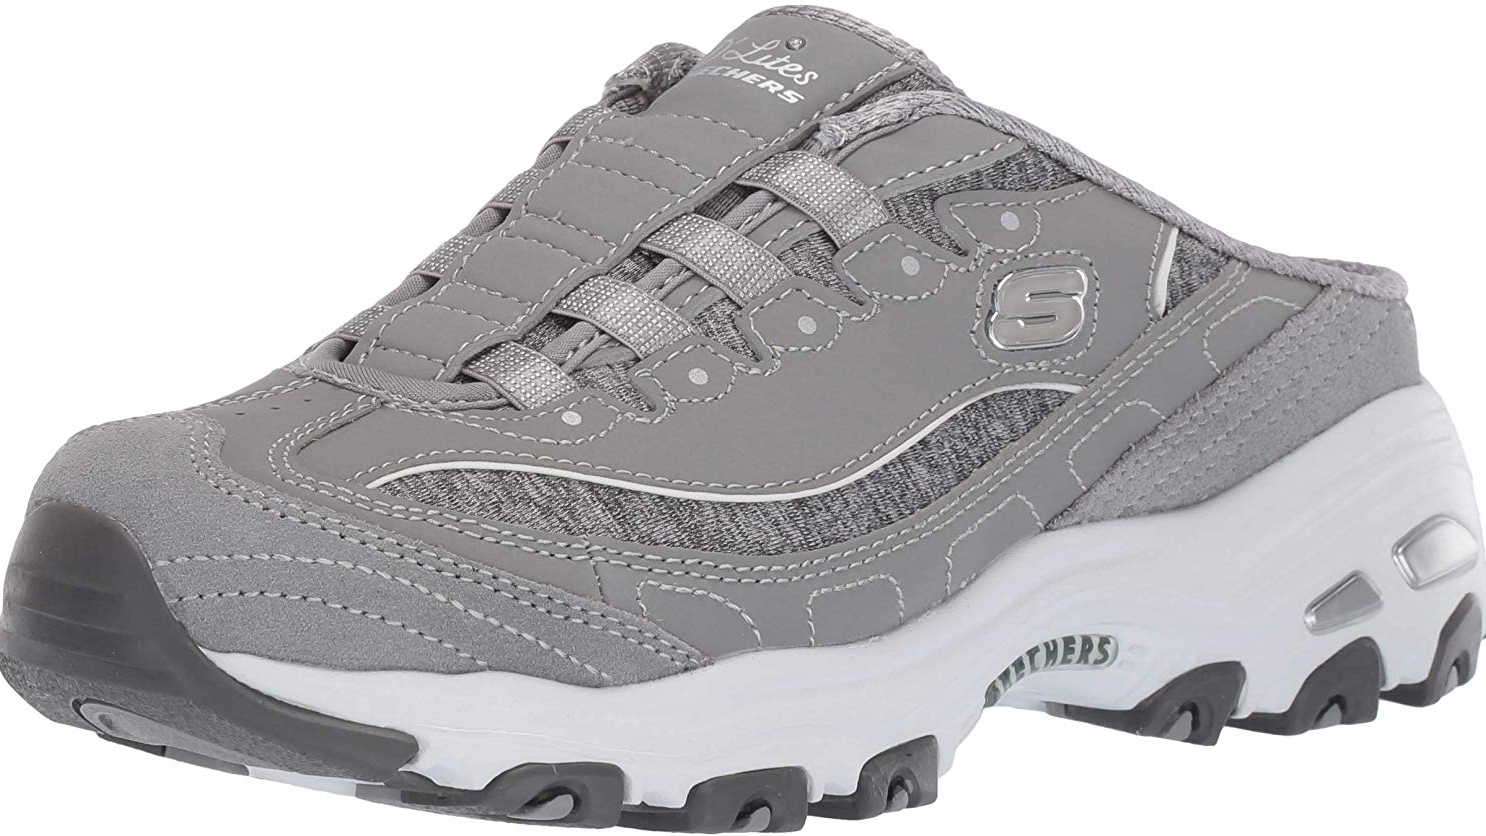 skechers house shoes